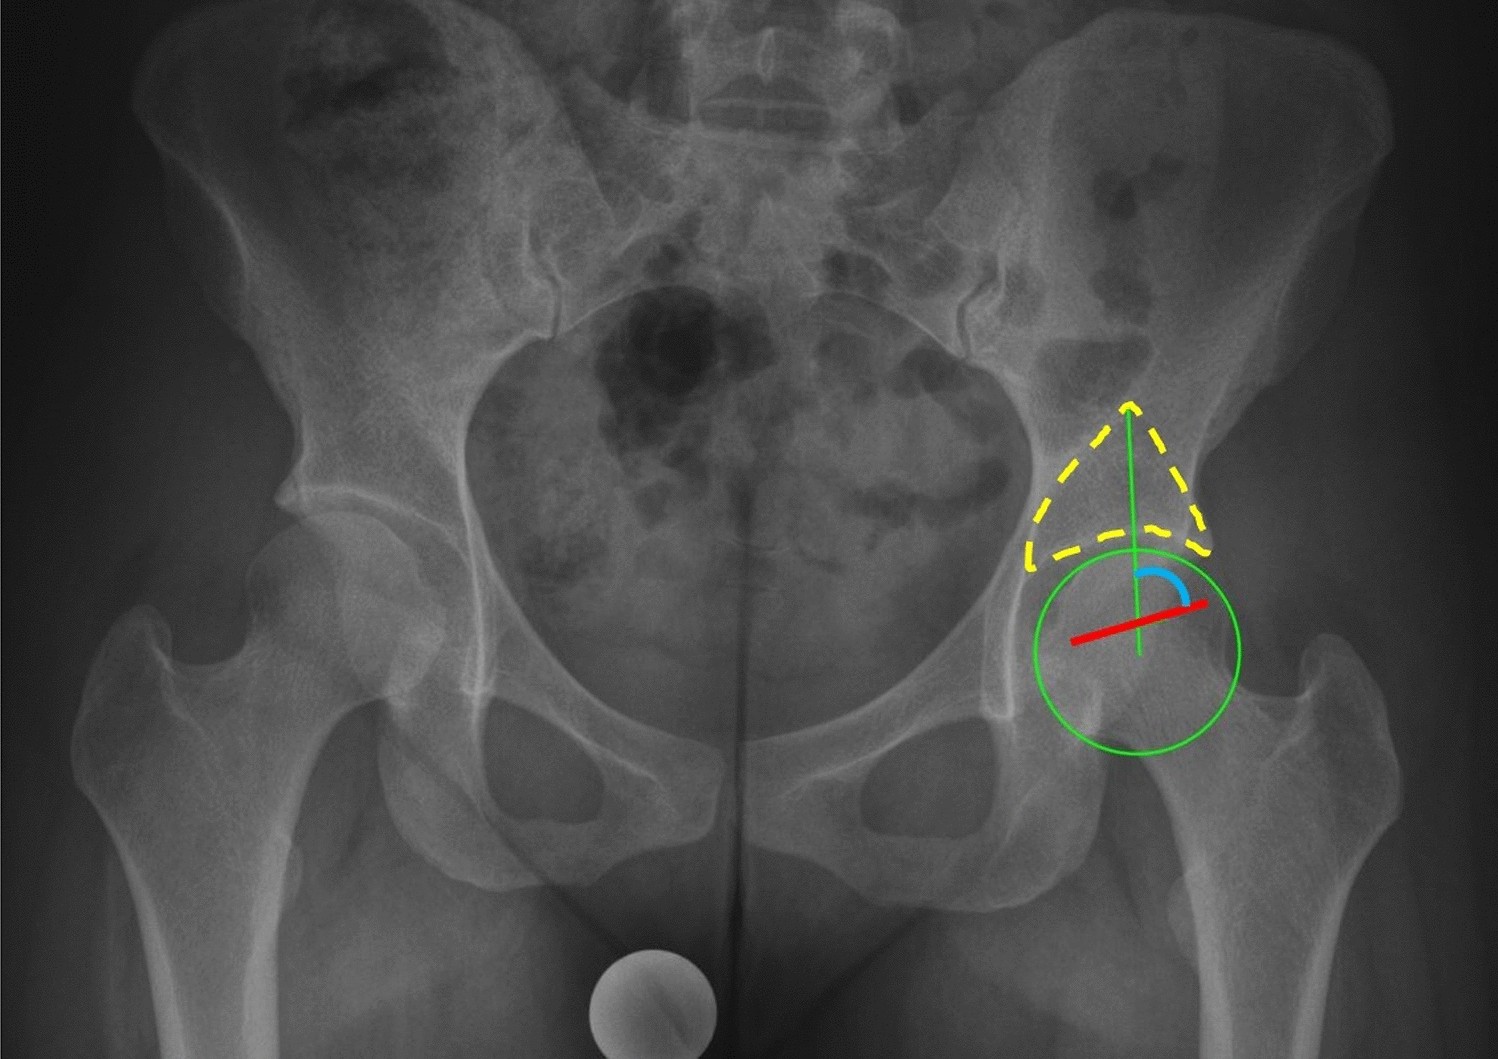 Defining the Gothic Arch Angle (GAA) as a radiographic diagnostic tool for  instability in hip dysplasia | Scientific Reports